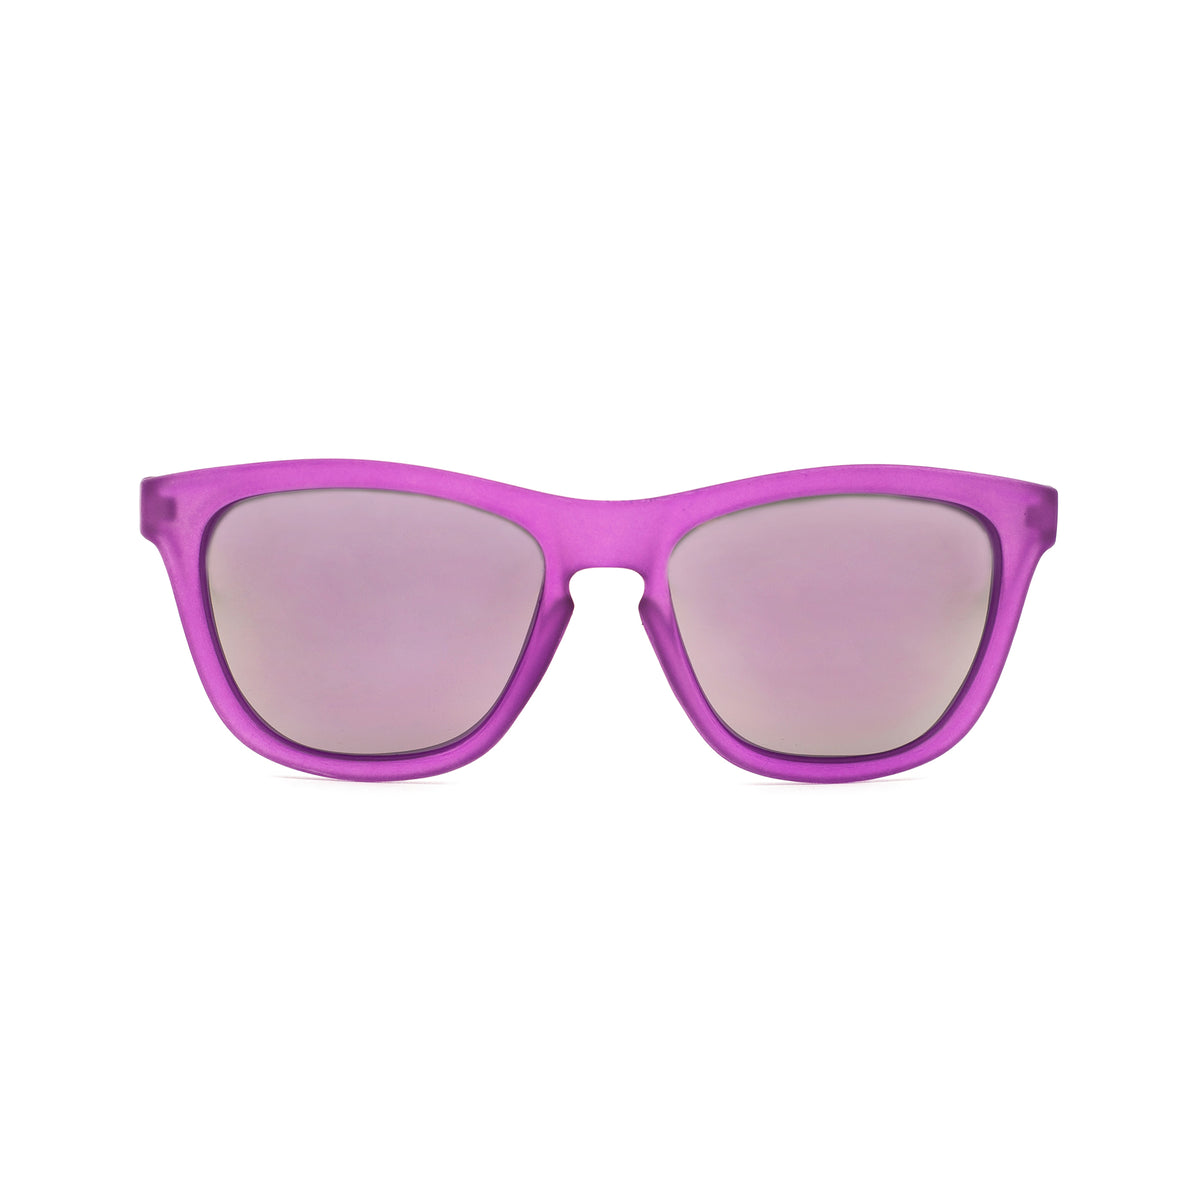 Front view of polarized kids sunglasses in a purple frame